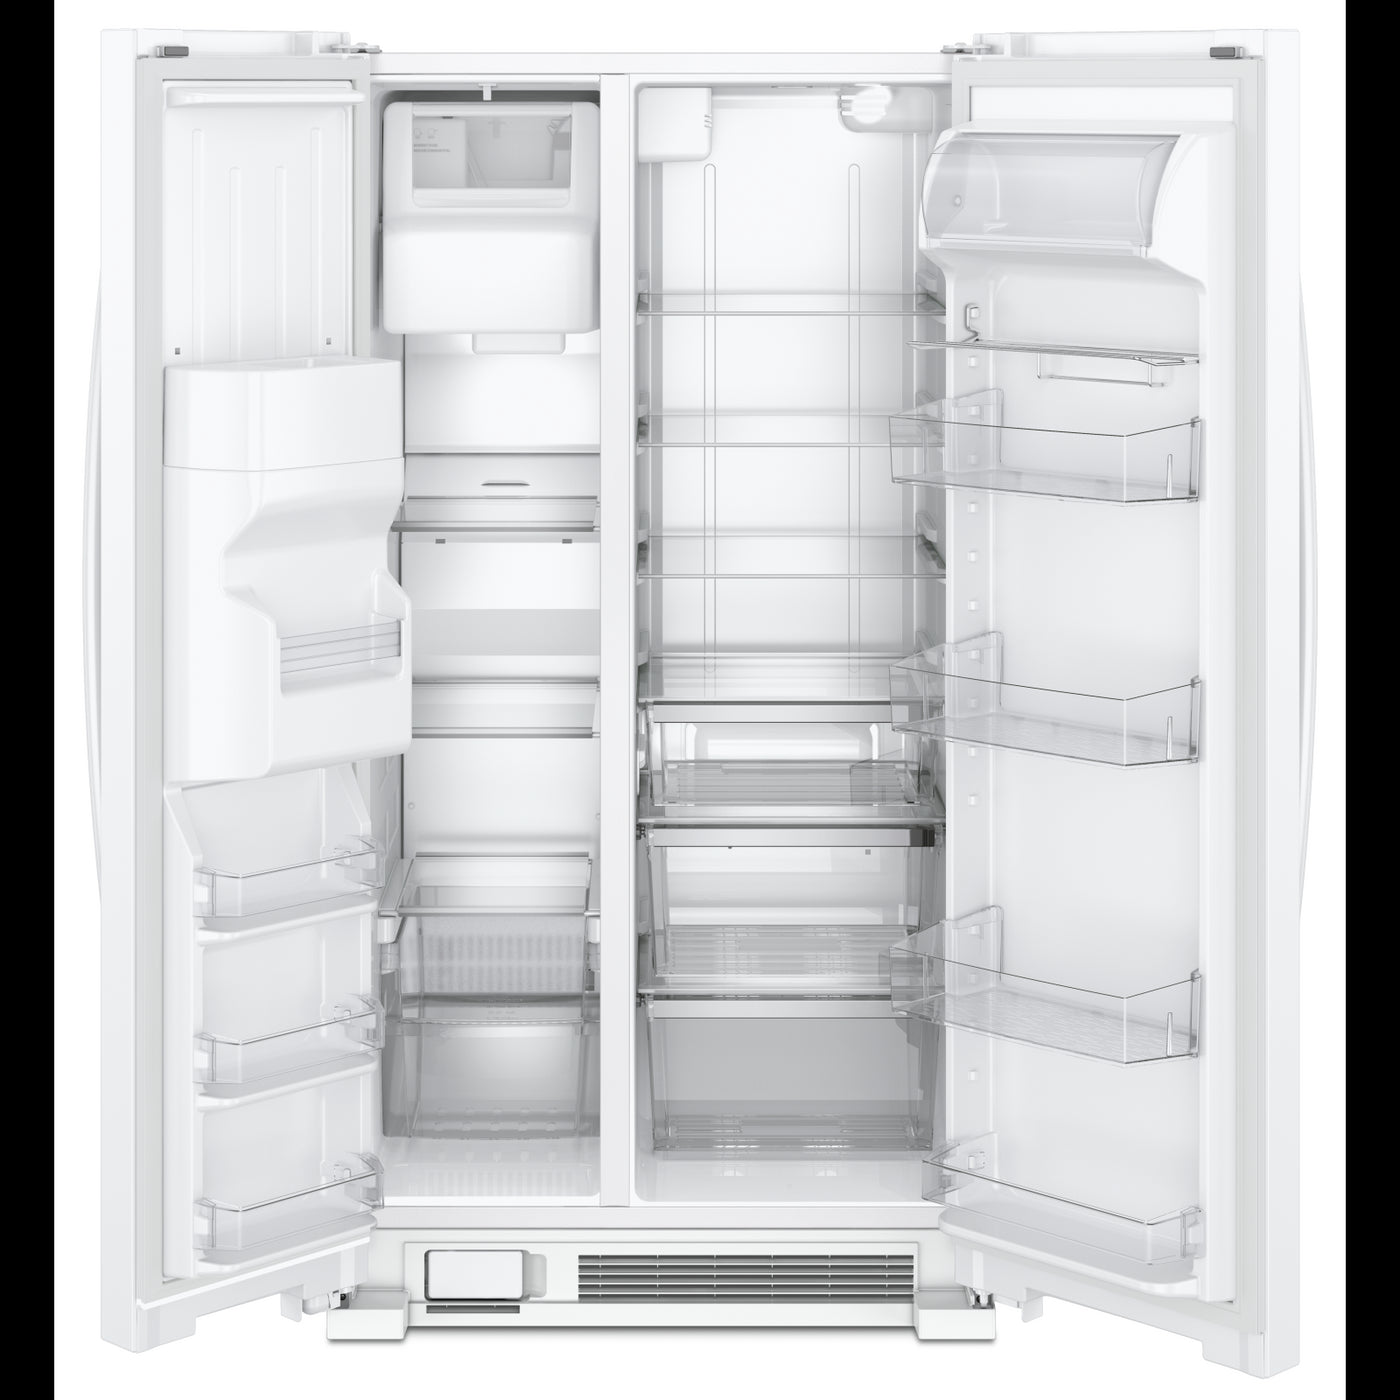 Whirlpool White Side-by-Side Refrigerator (21 Cu. Ft.) - WRS321SDHW